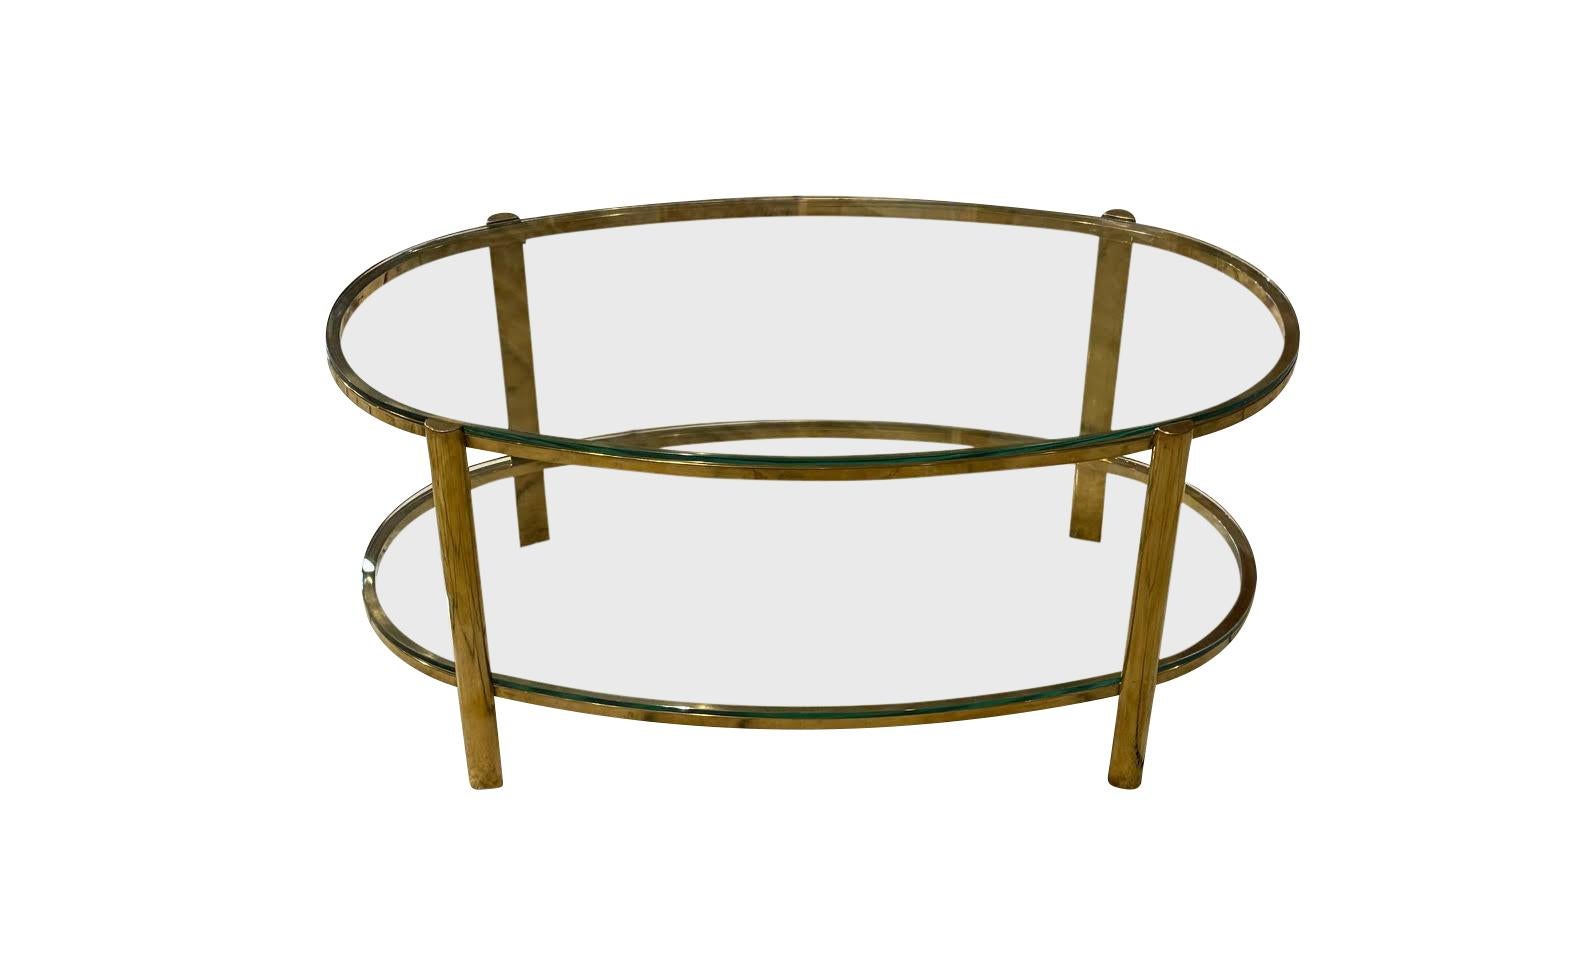 1940's French Jacques Quinet for Malabert unusual oval shaped coffee table.
Two tiers.
Signature curved corners.
Polished bronze.